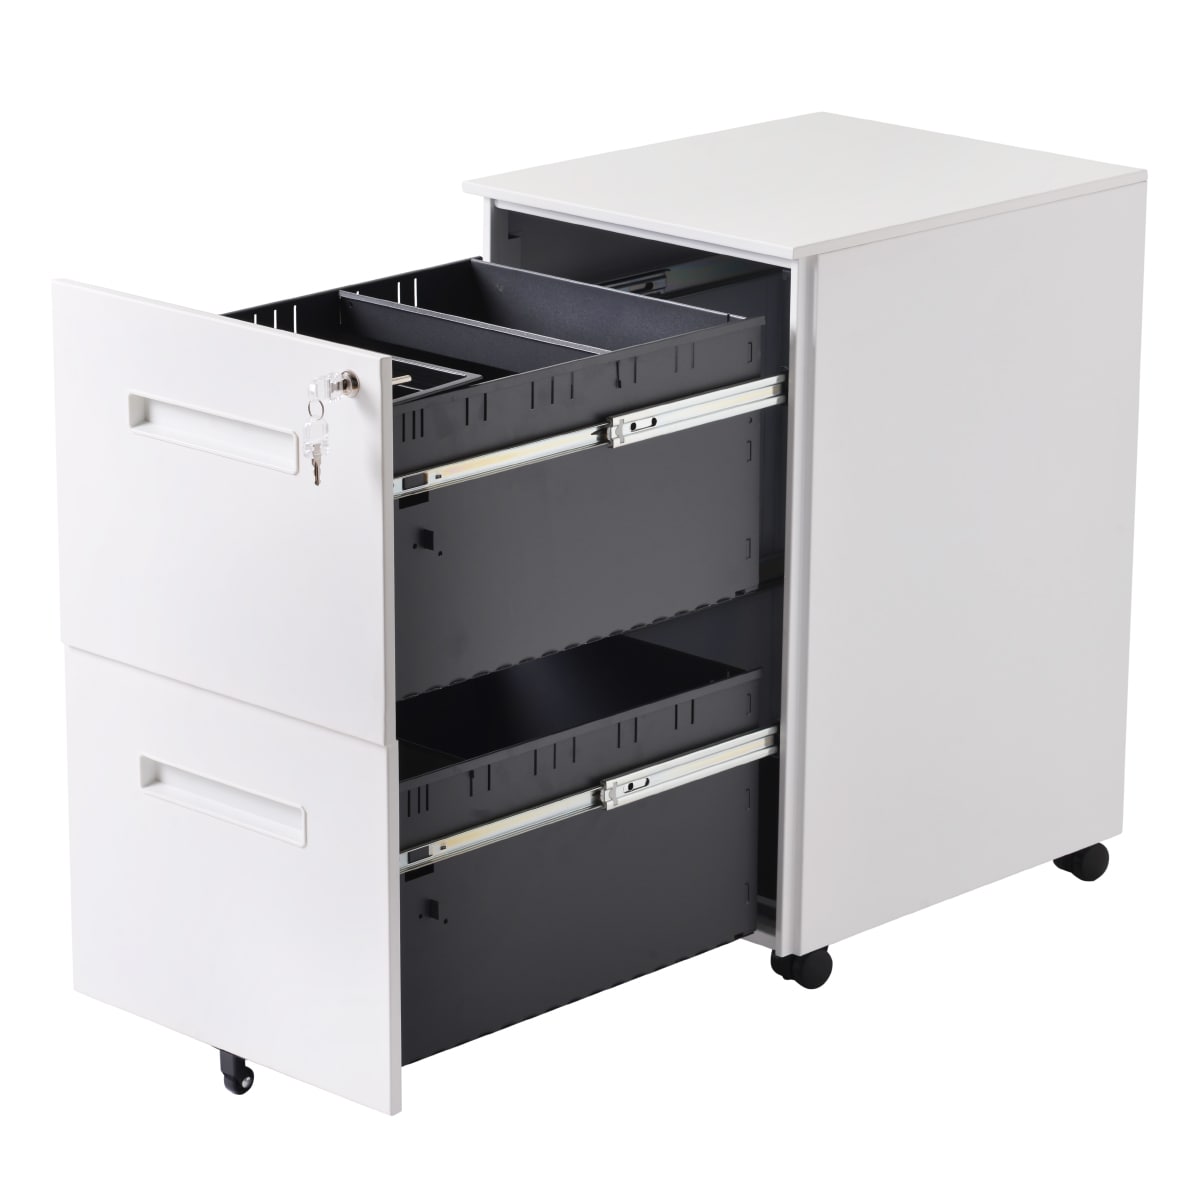 Sumyeg Filing Cabinet White 2-Drawer File Cabinet in the File Cabinets ...